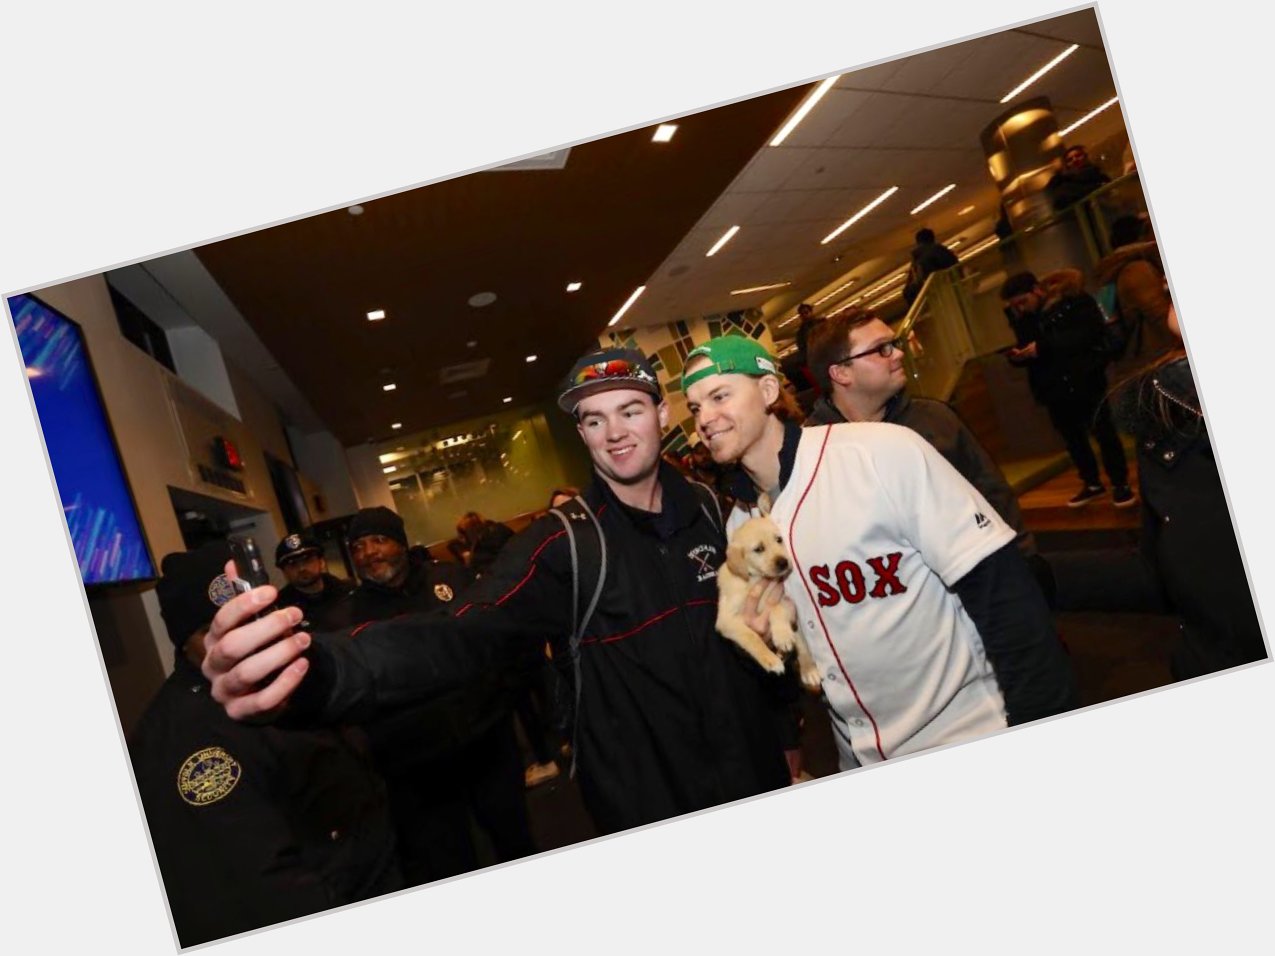 Happy Birthday to my good friend Brock Holt, don t ever retire please

cc: 